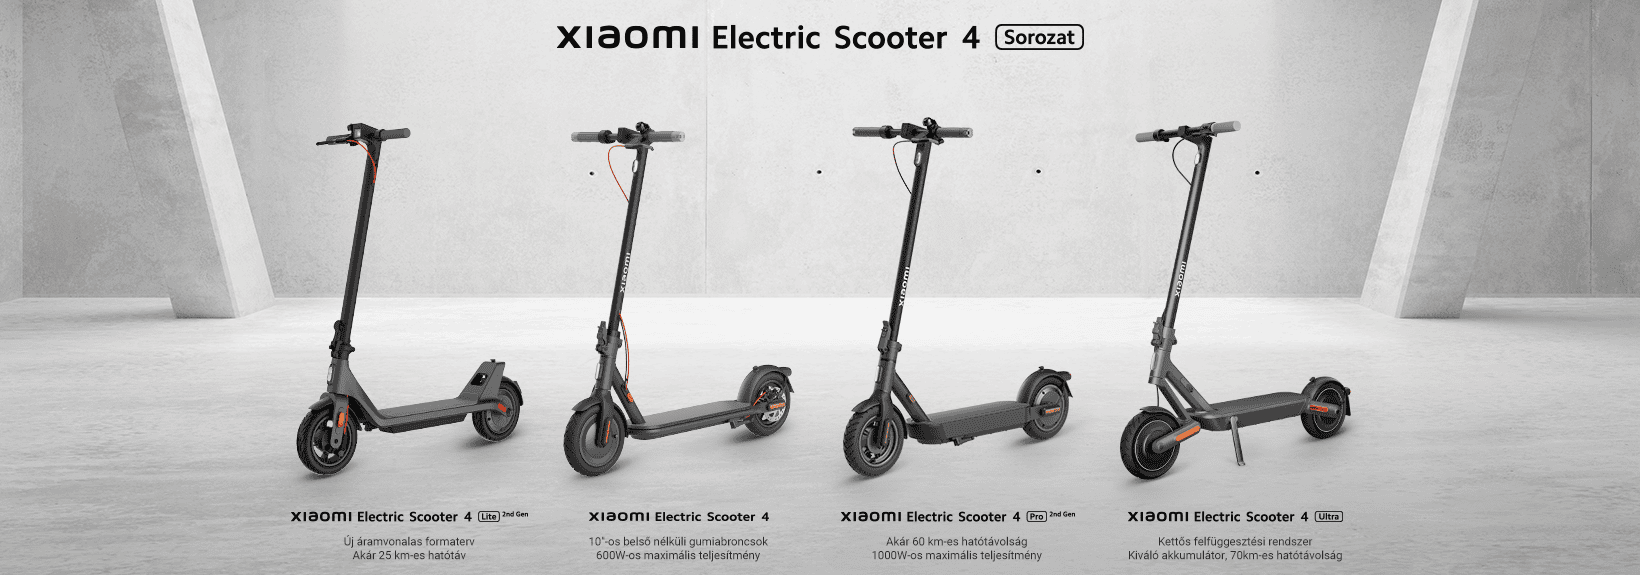 Scooter 4 series